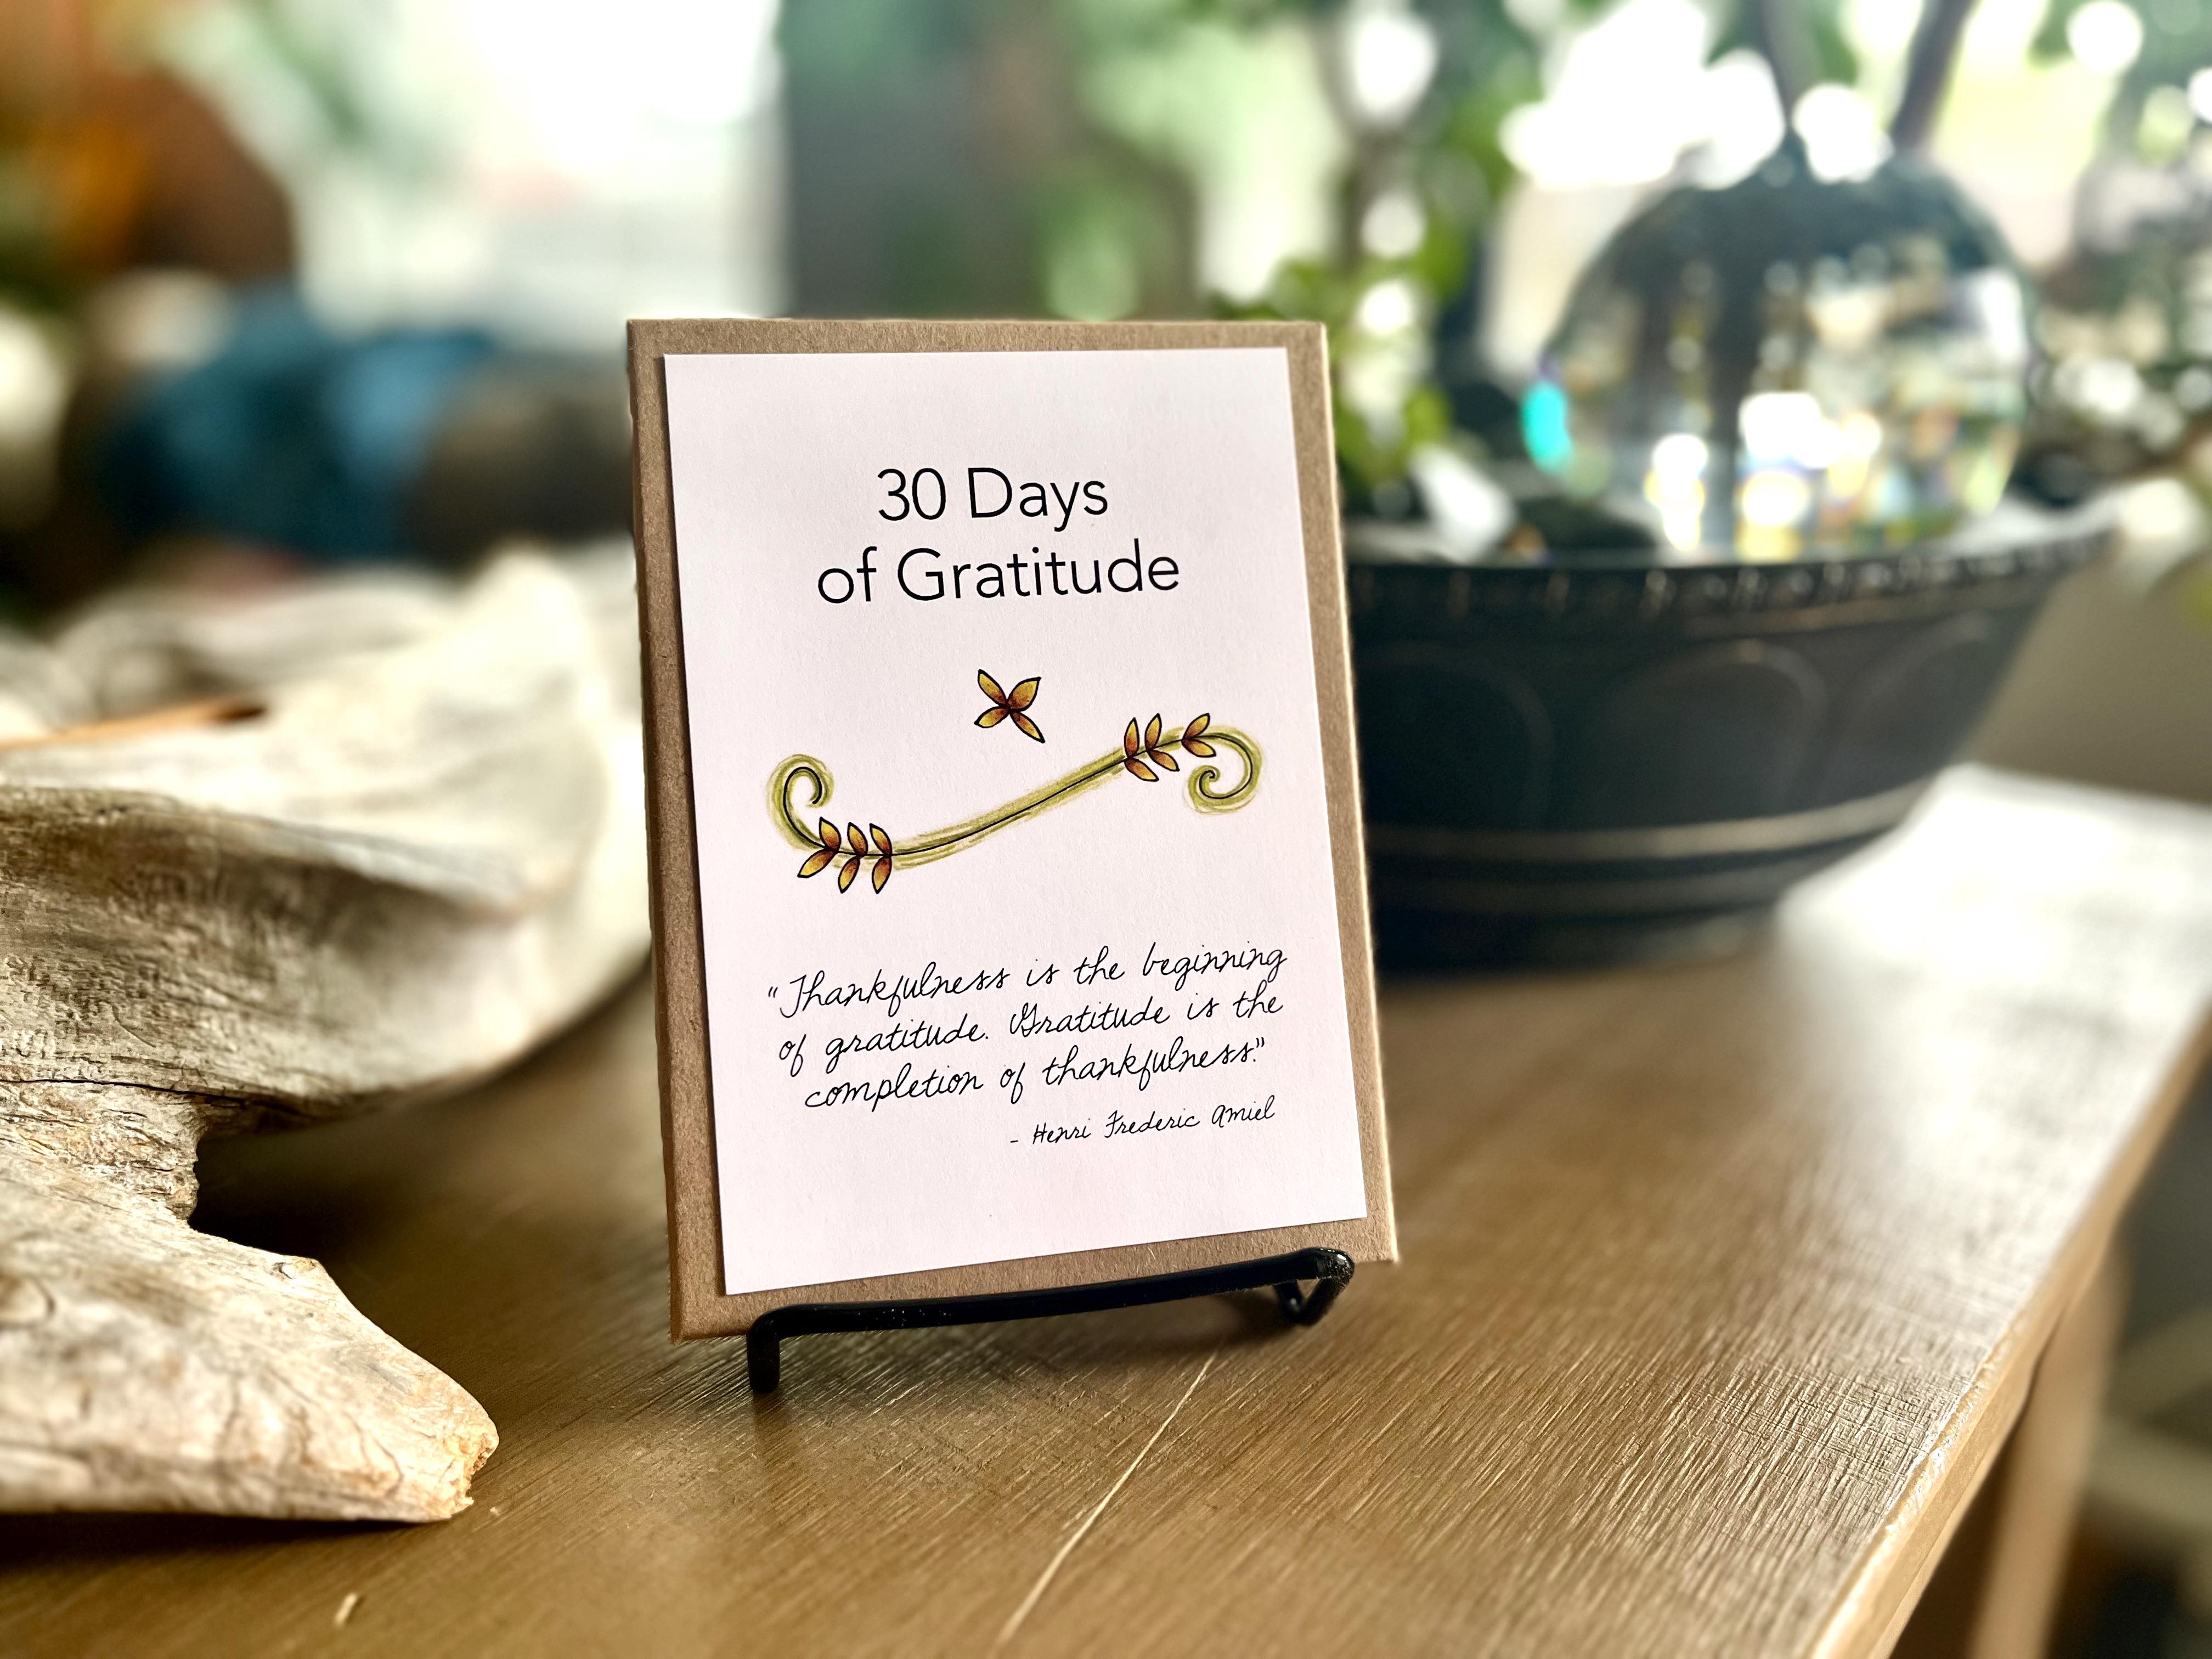 30 Days of Gratitude Boxed Card Deck with Stand